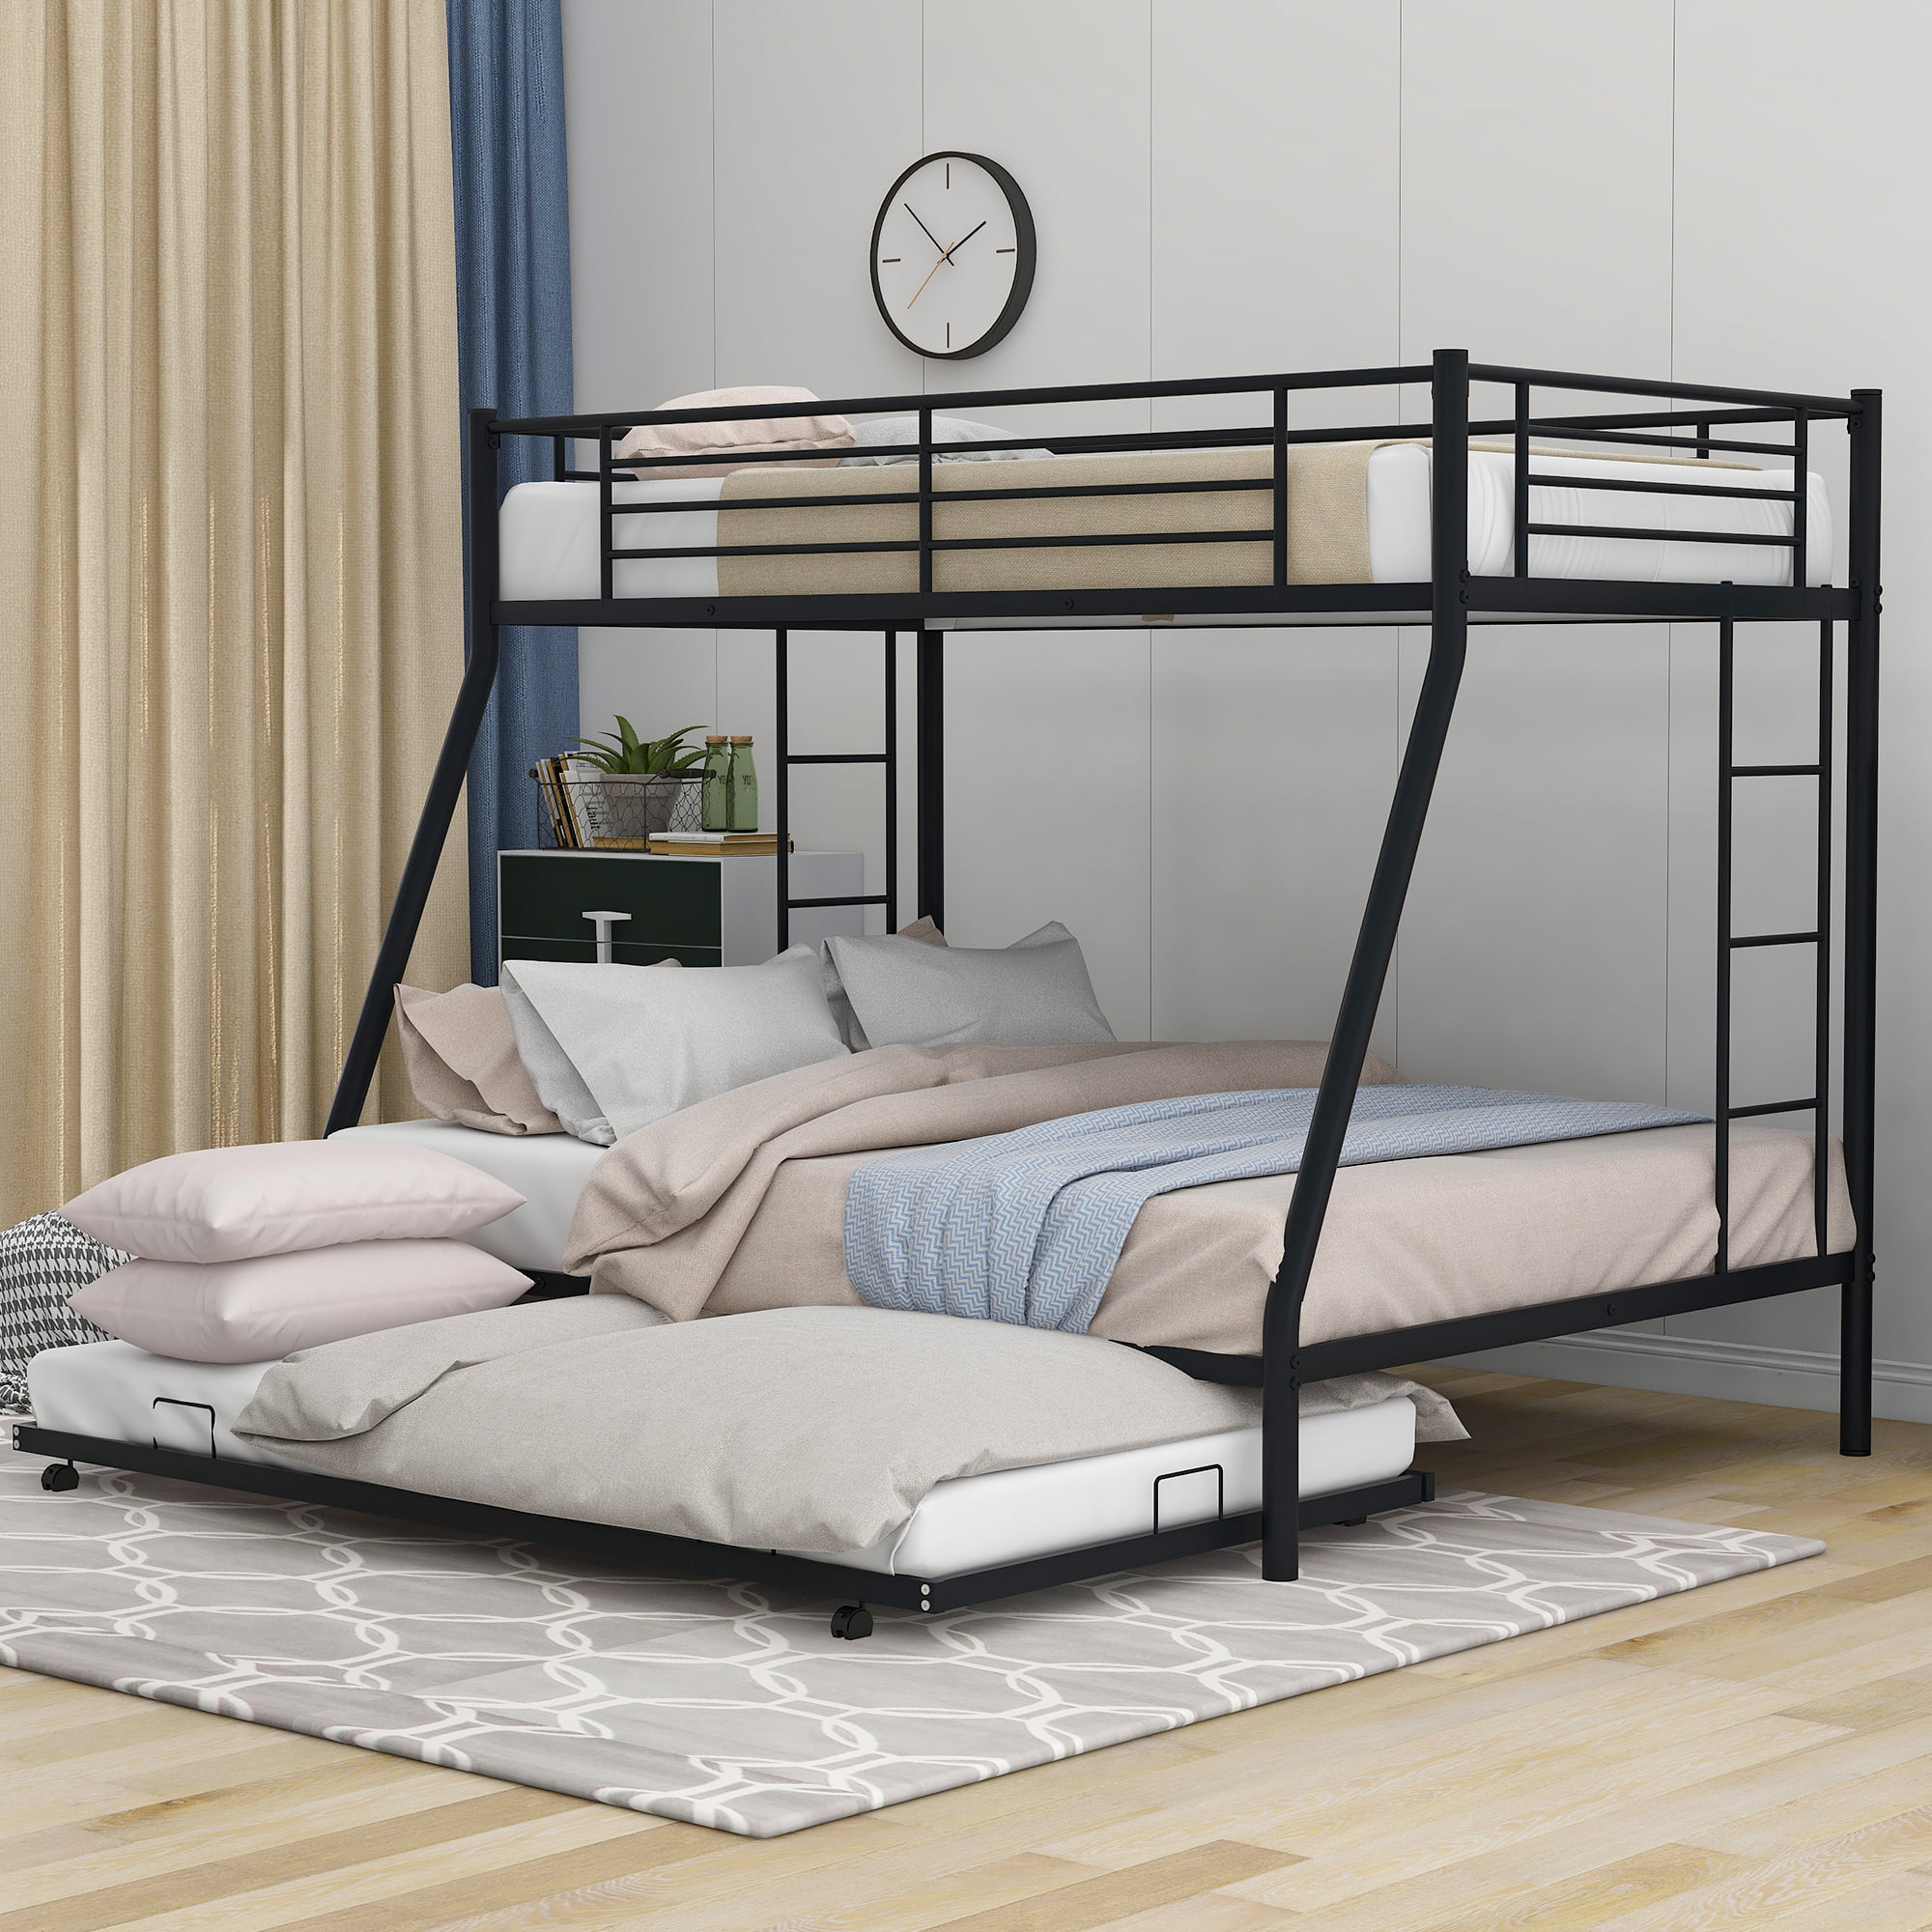 Euroco Steel Twin Over Full Bunk Bed, Twin Over Full Futon Bunk Bed Assembly Instructions